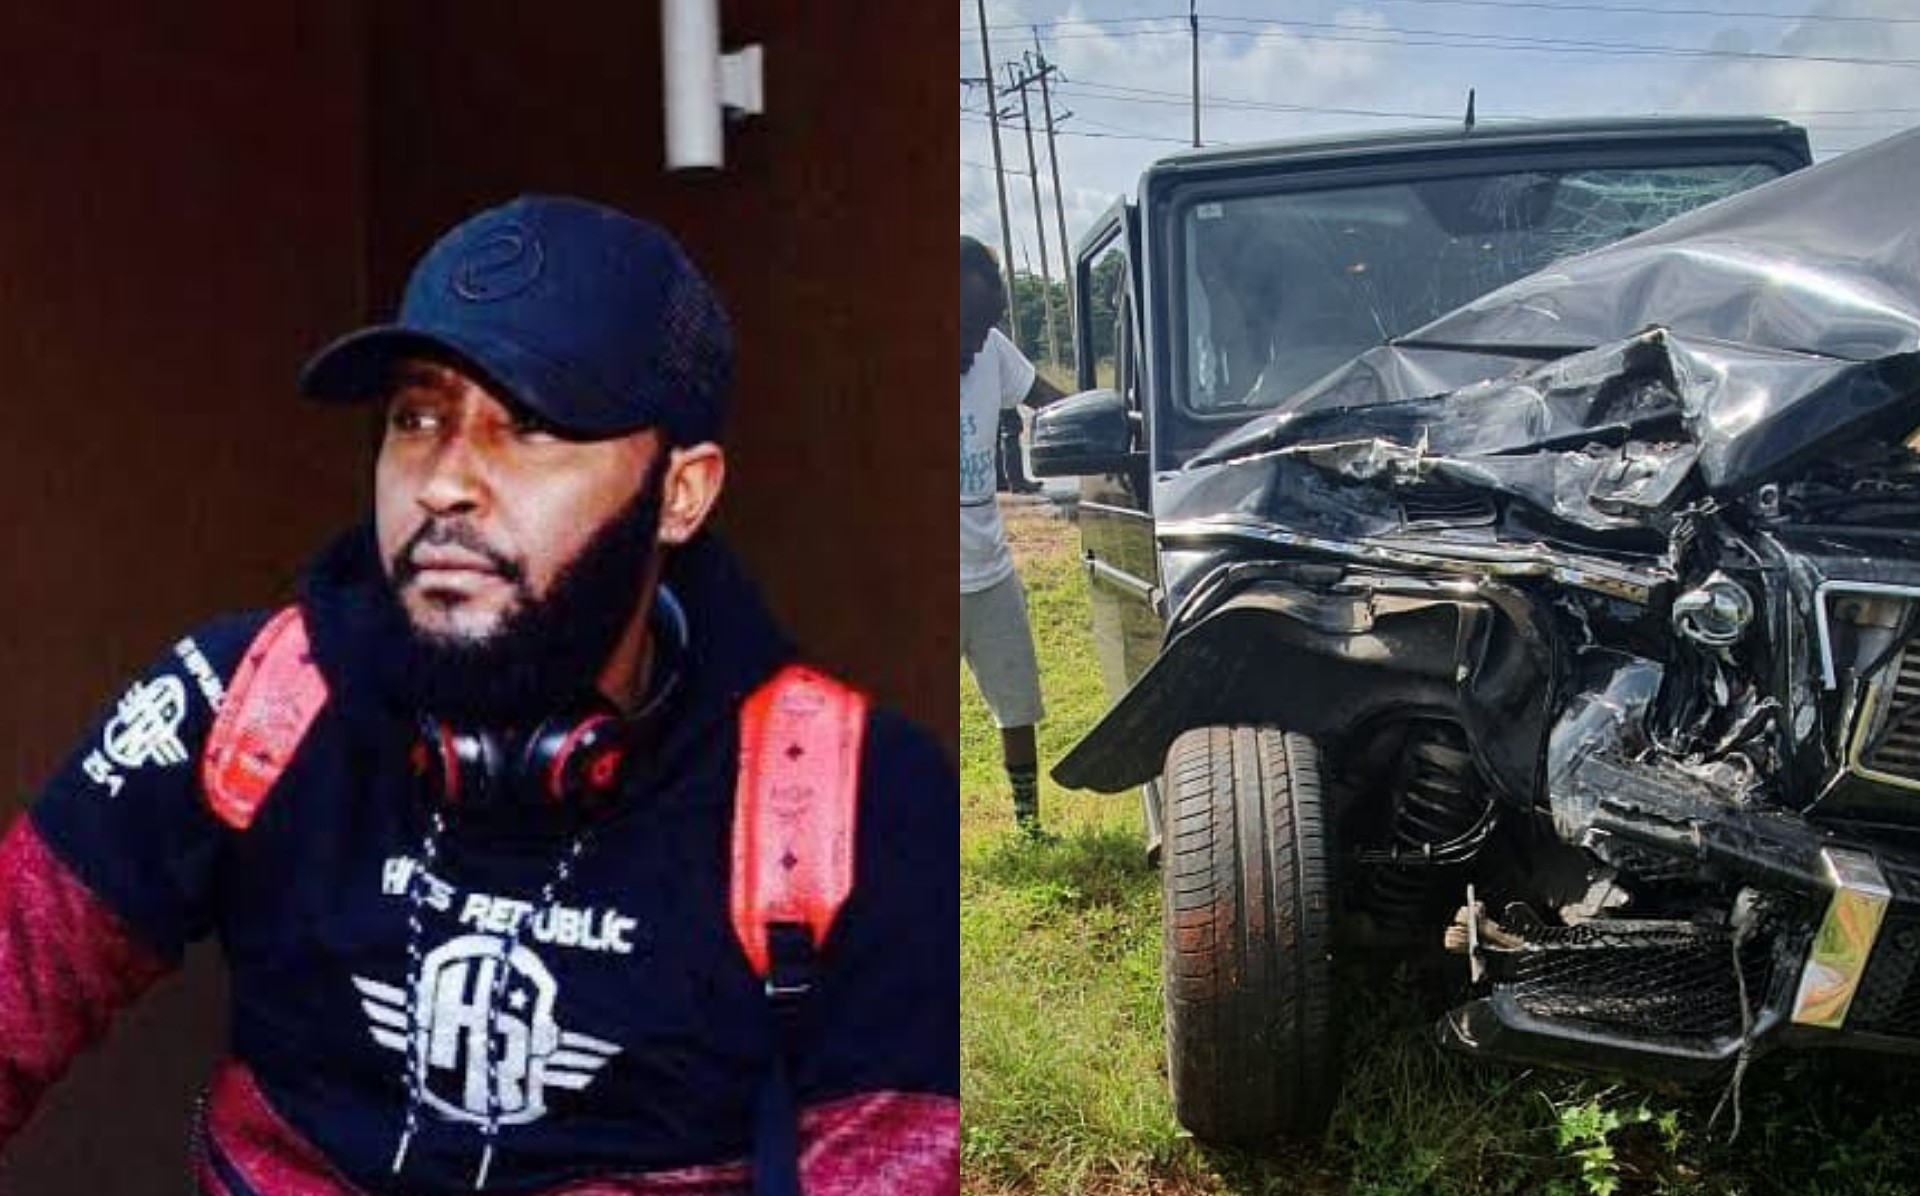 ¨I have realized life is very precious¨ a shaken Shaffie Weru admits after terrible car crash